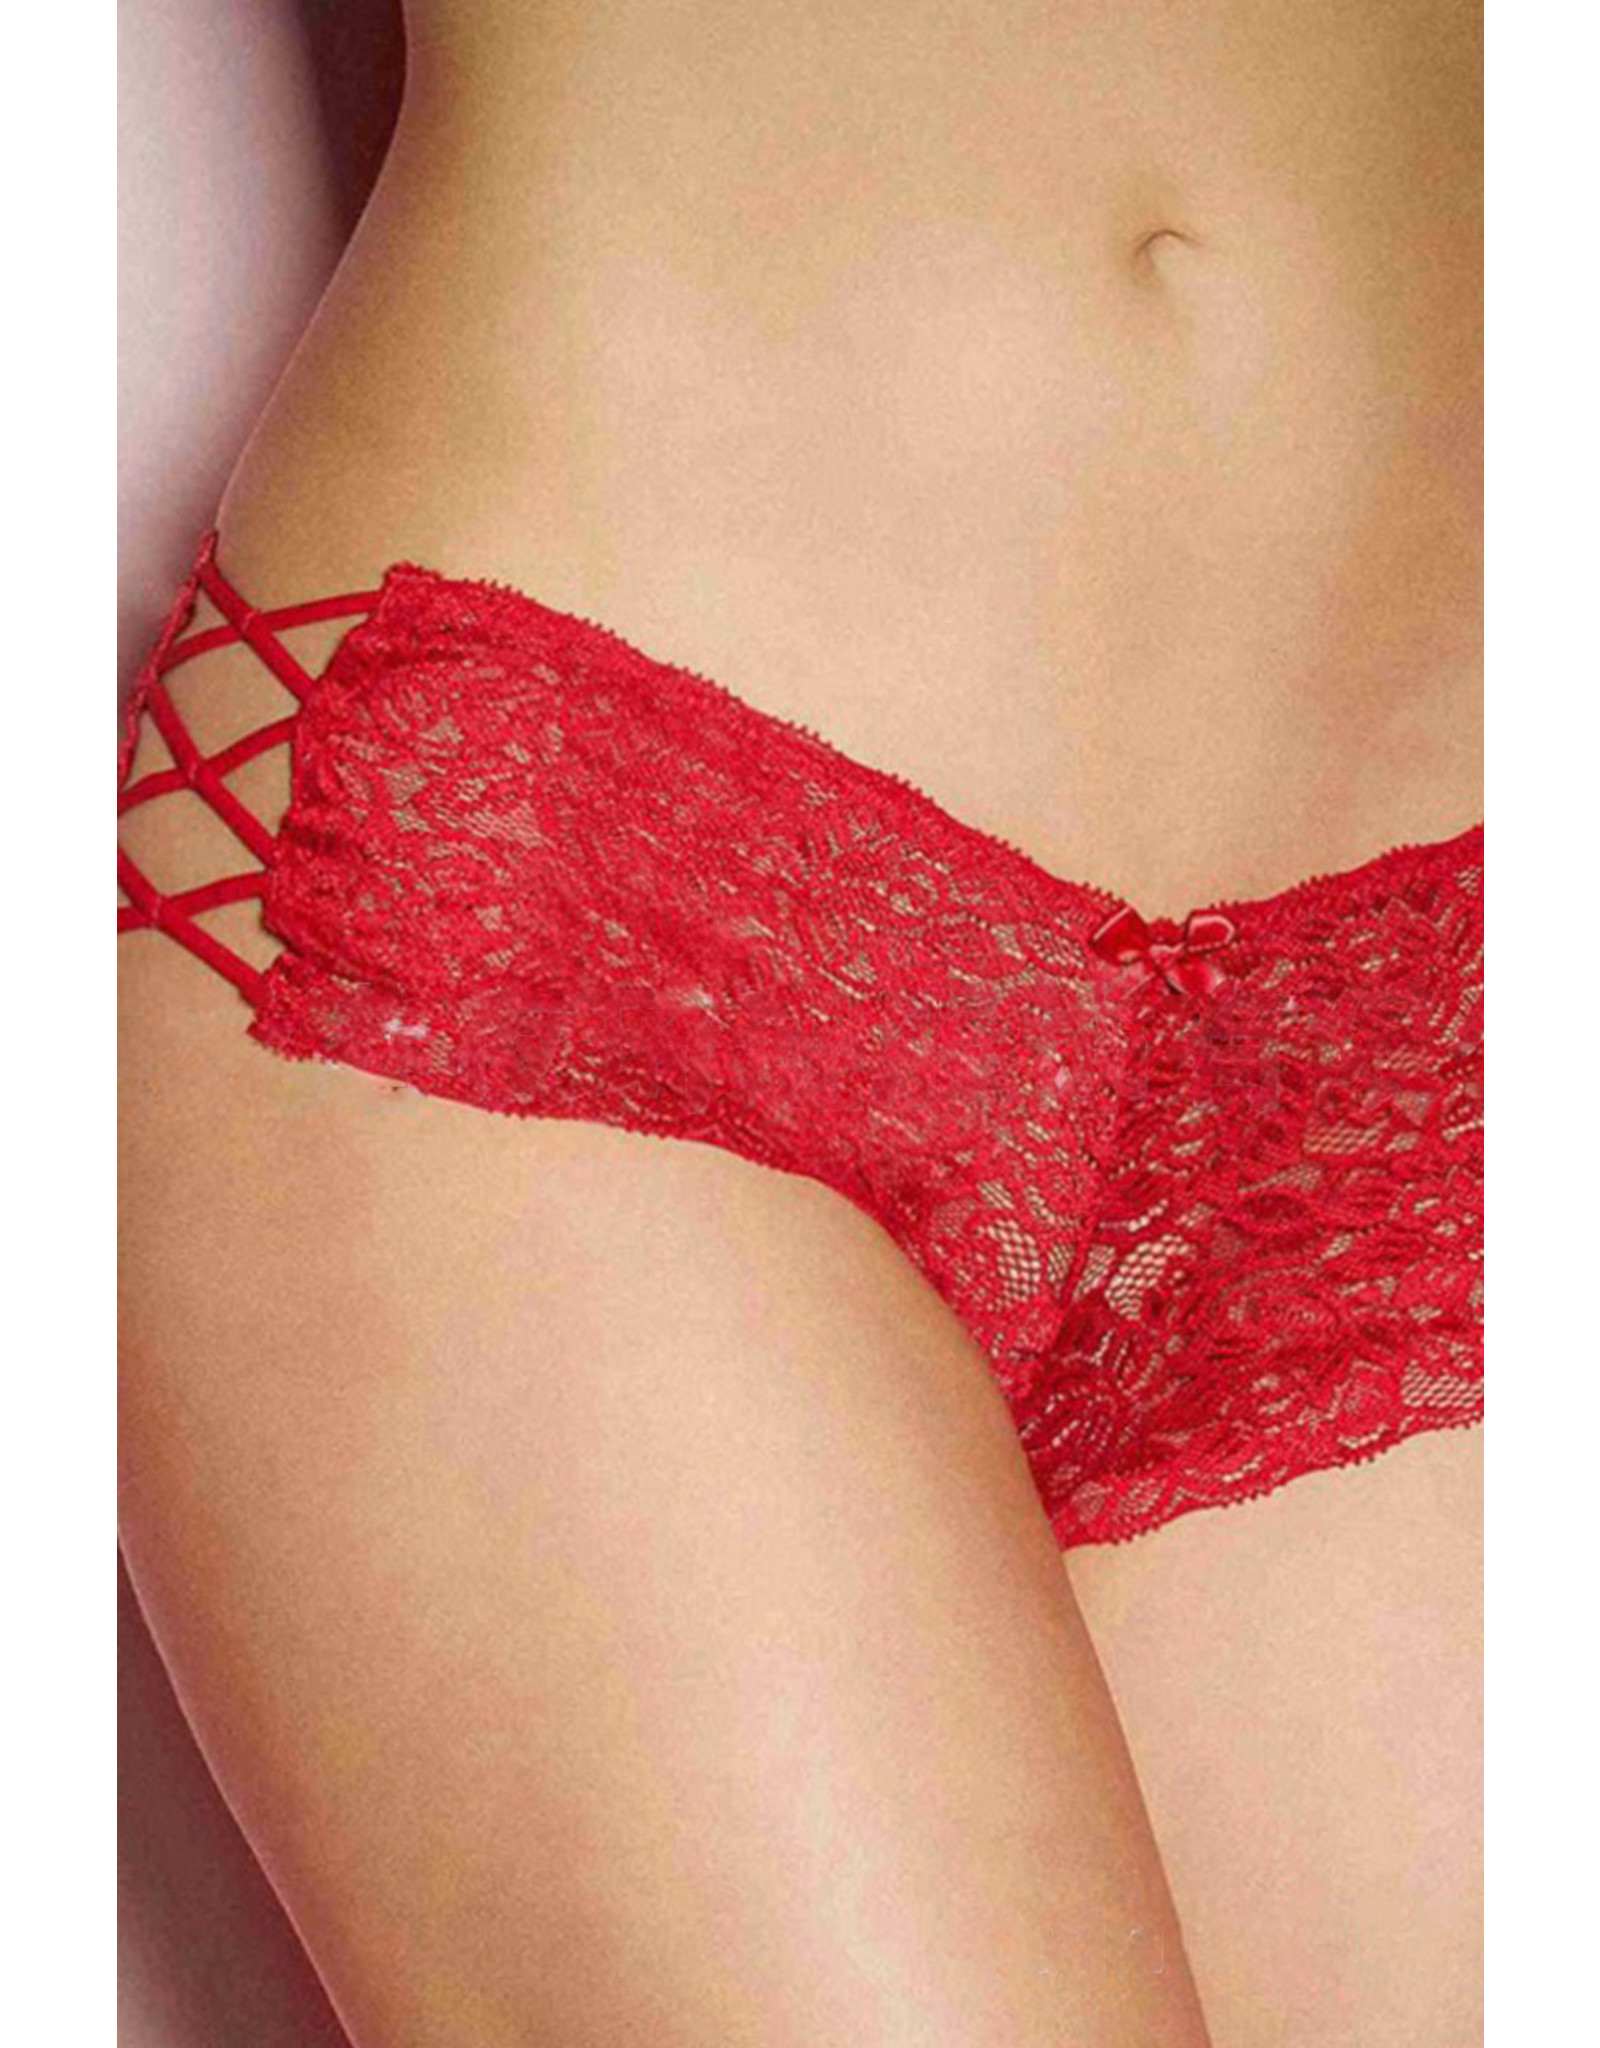 RED CRISSCROSS HOLLOW-OUT SIDES LACE THONG PANTY RED, SIZE:(US 4-6)SMALL